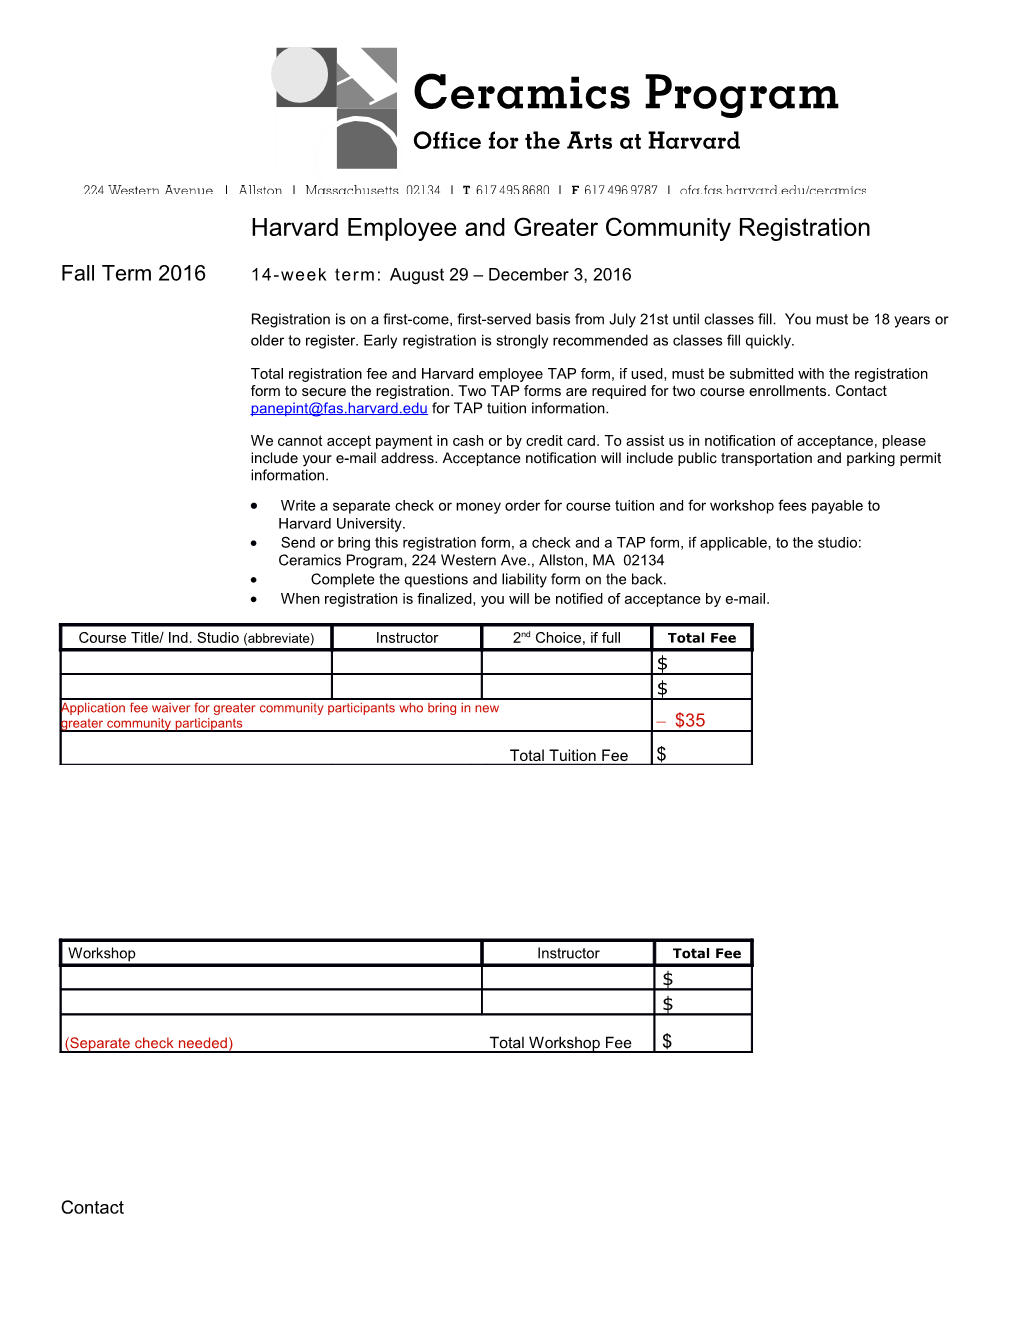 Harvard Employee and Greater Community Registration